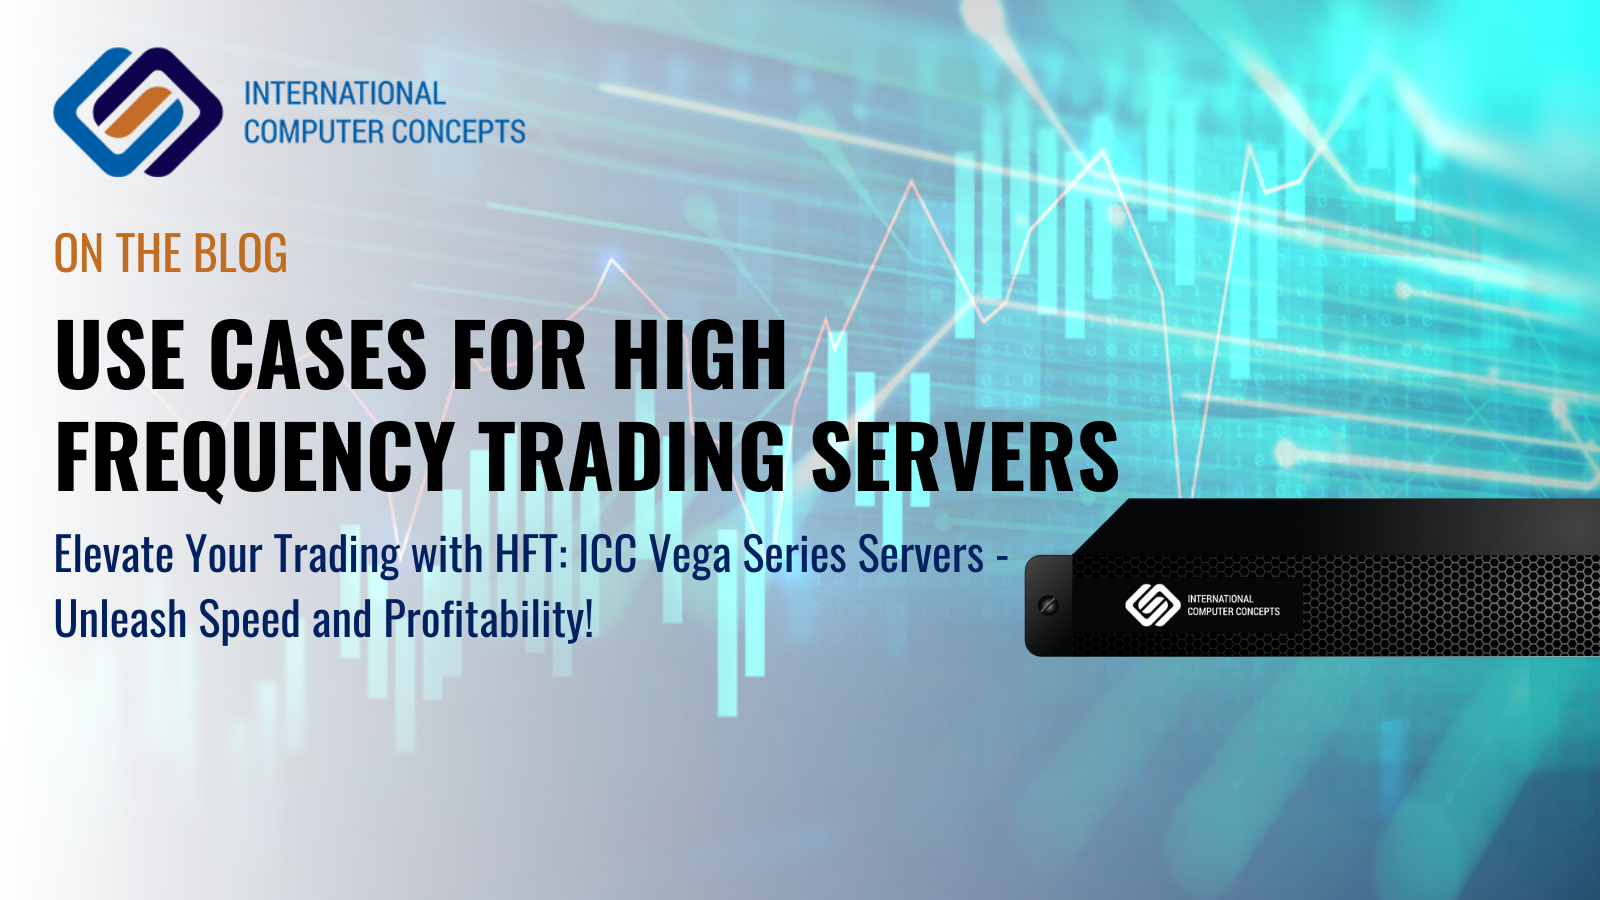 Use cases for High Frequency Trading Servers and our powerful HFT server line